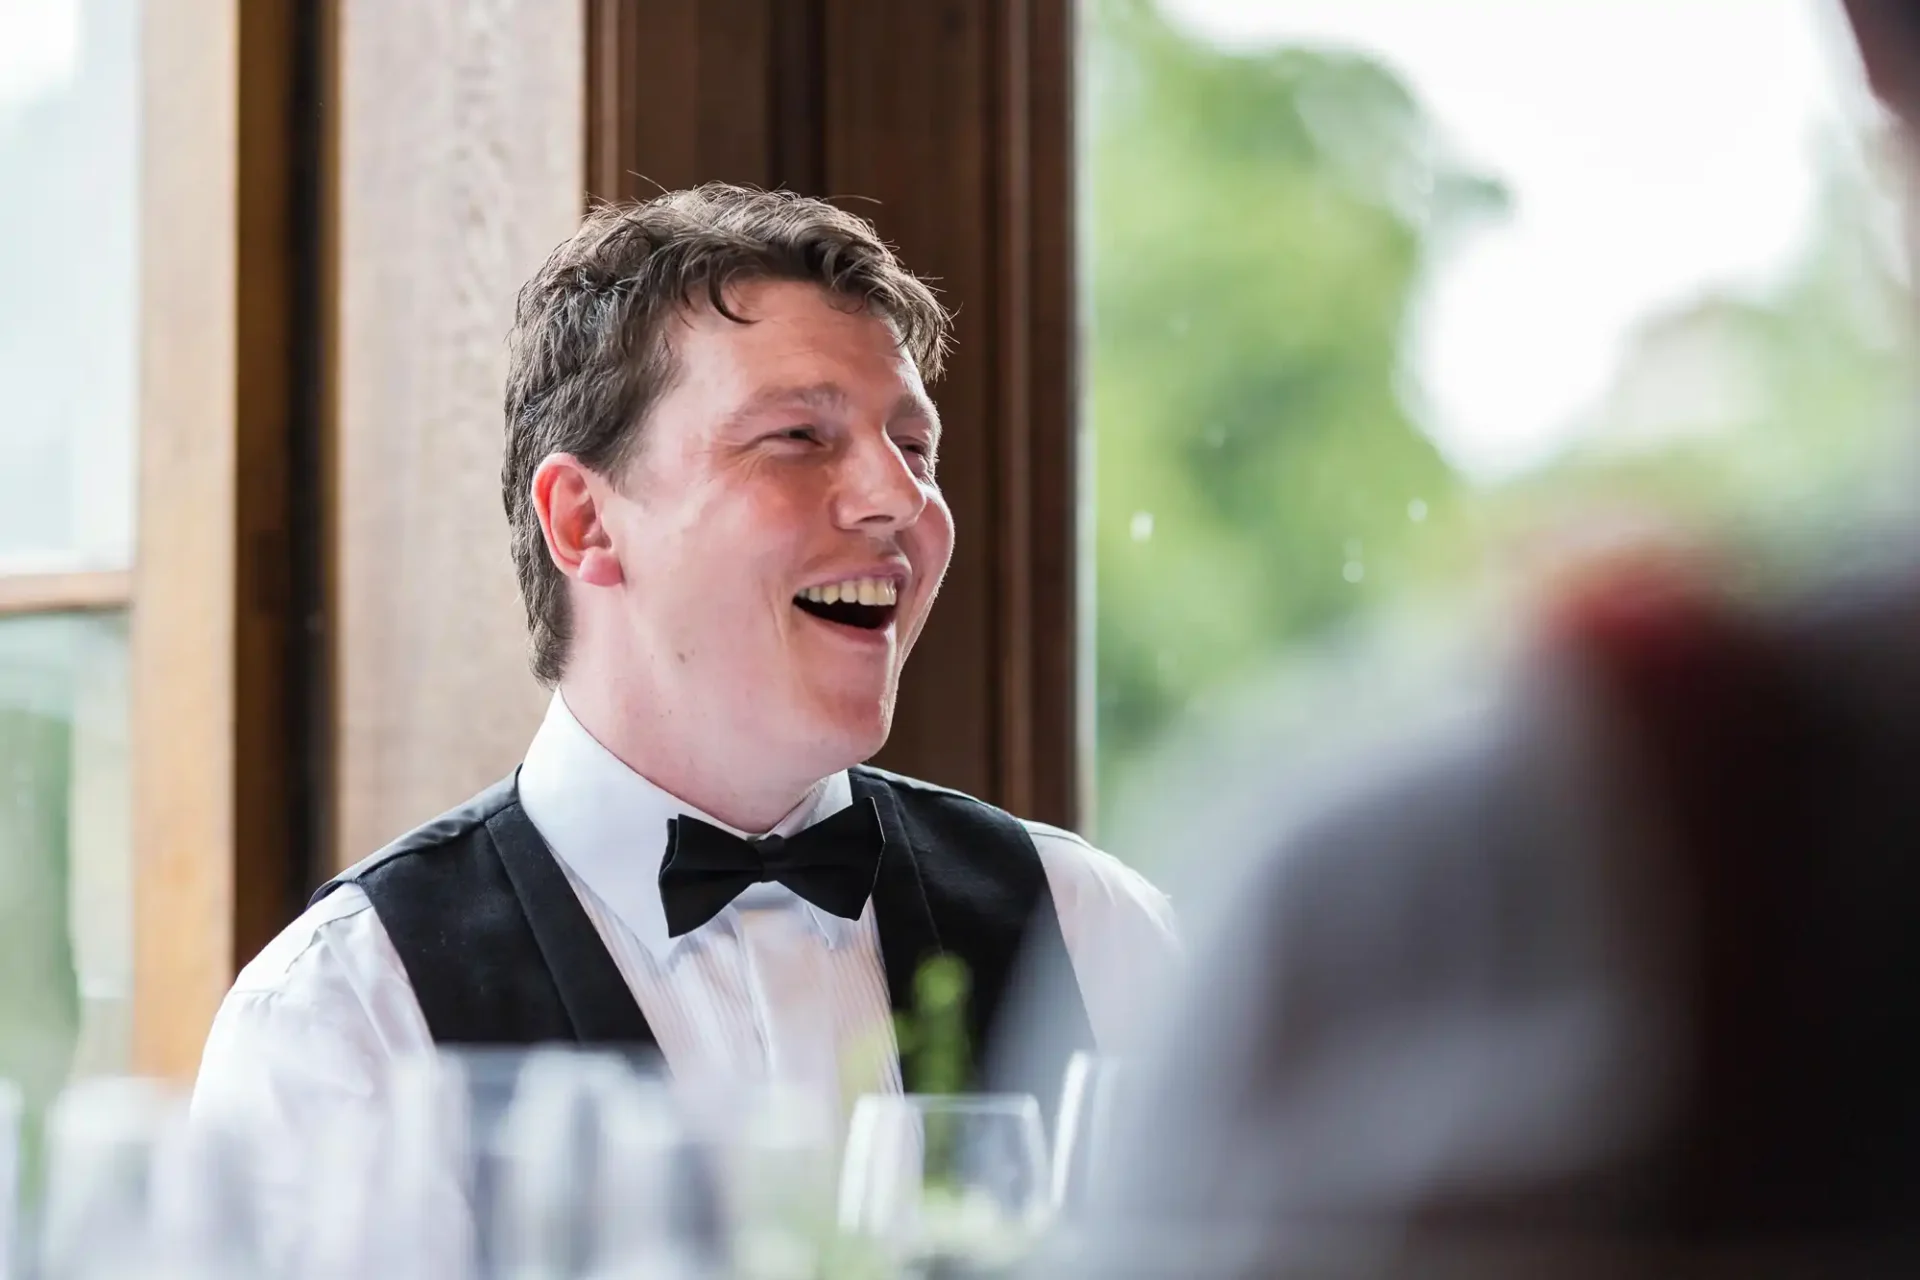 Man in a tuxedo smiling and laughing during a conversation at a formal event, seated indoors near a window.